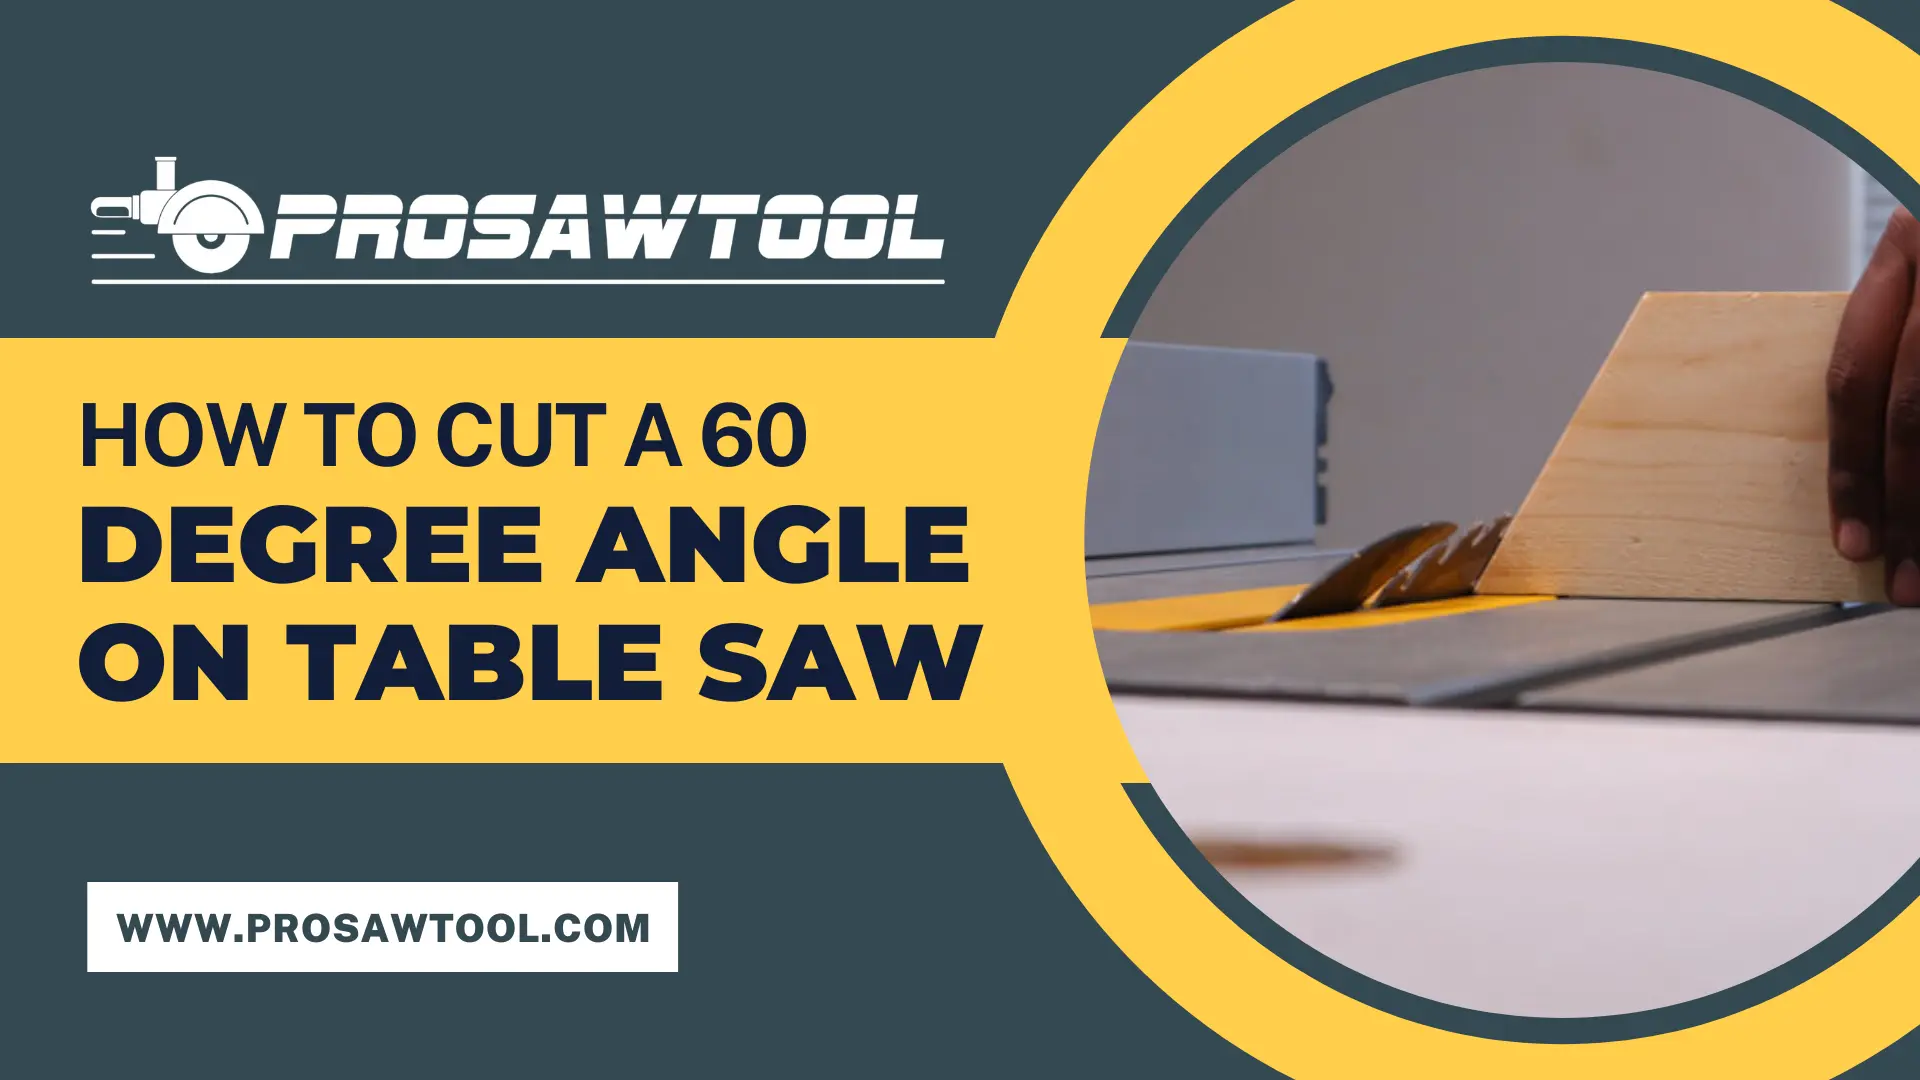 How To Cut A 60 Degree Angle On Table Saw